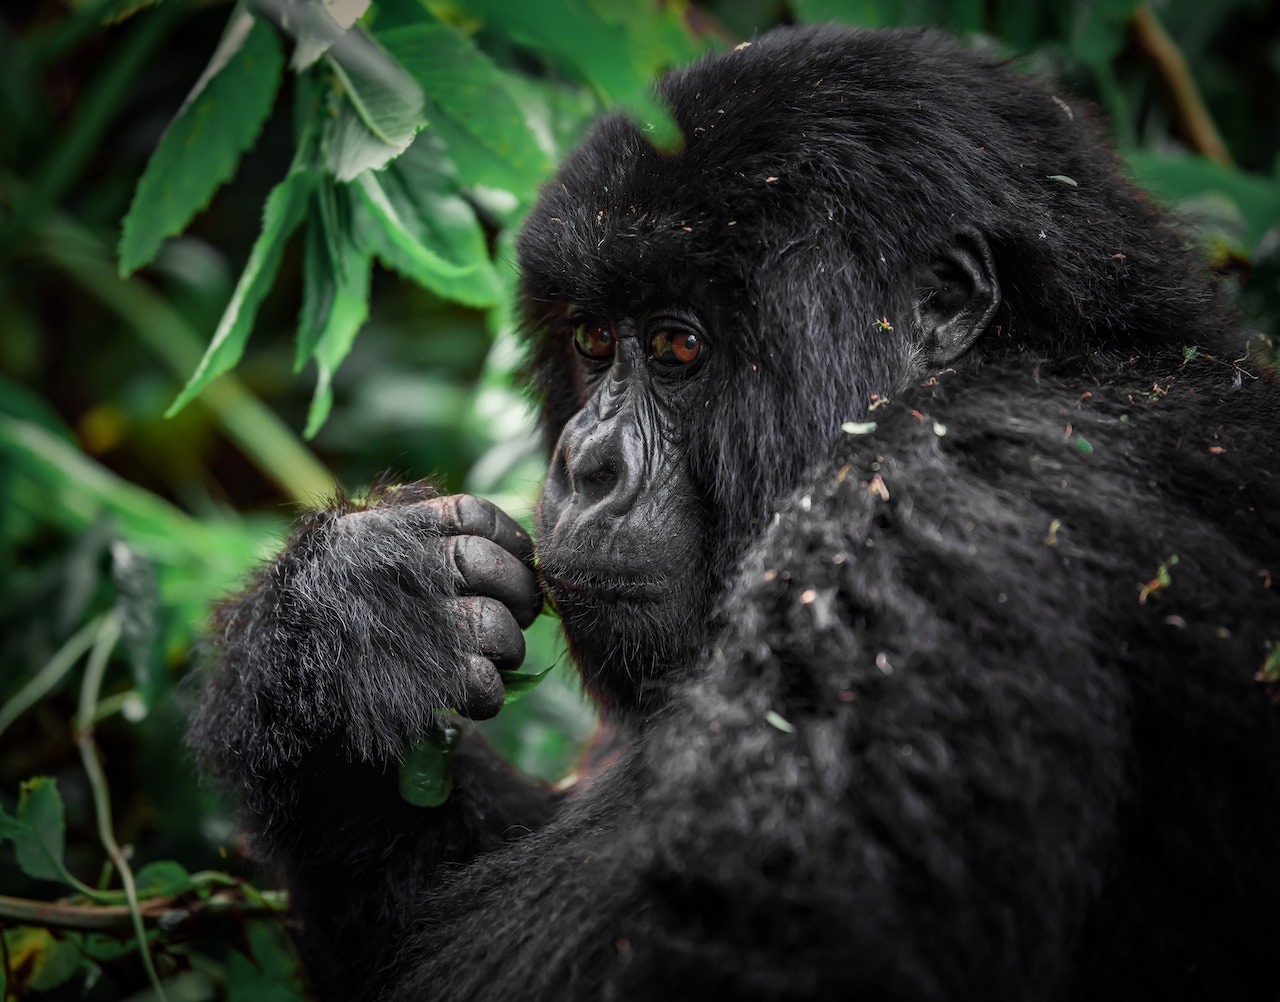 Rwanda is a country well-known for its gorilla trekking tours, but there is more to the country than just mountain gorillas. Here are some of the best non-gorilla activities in the country.